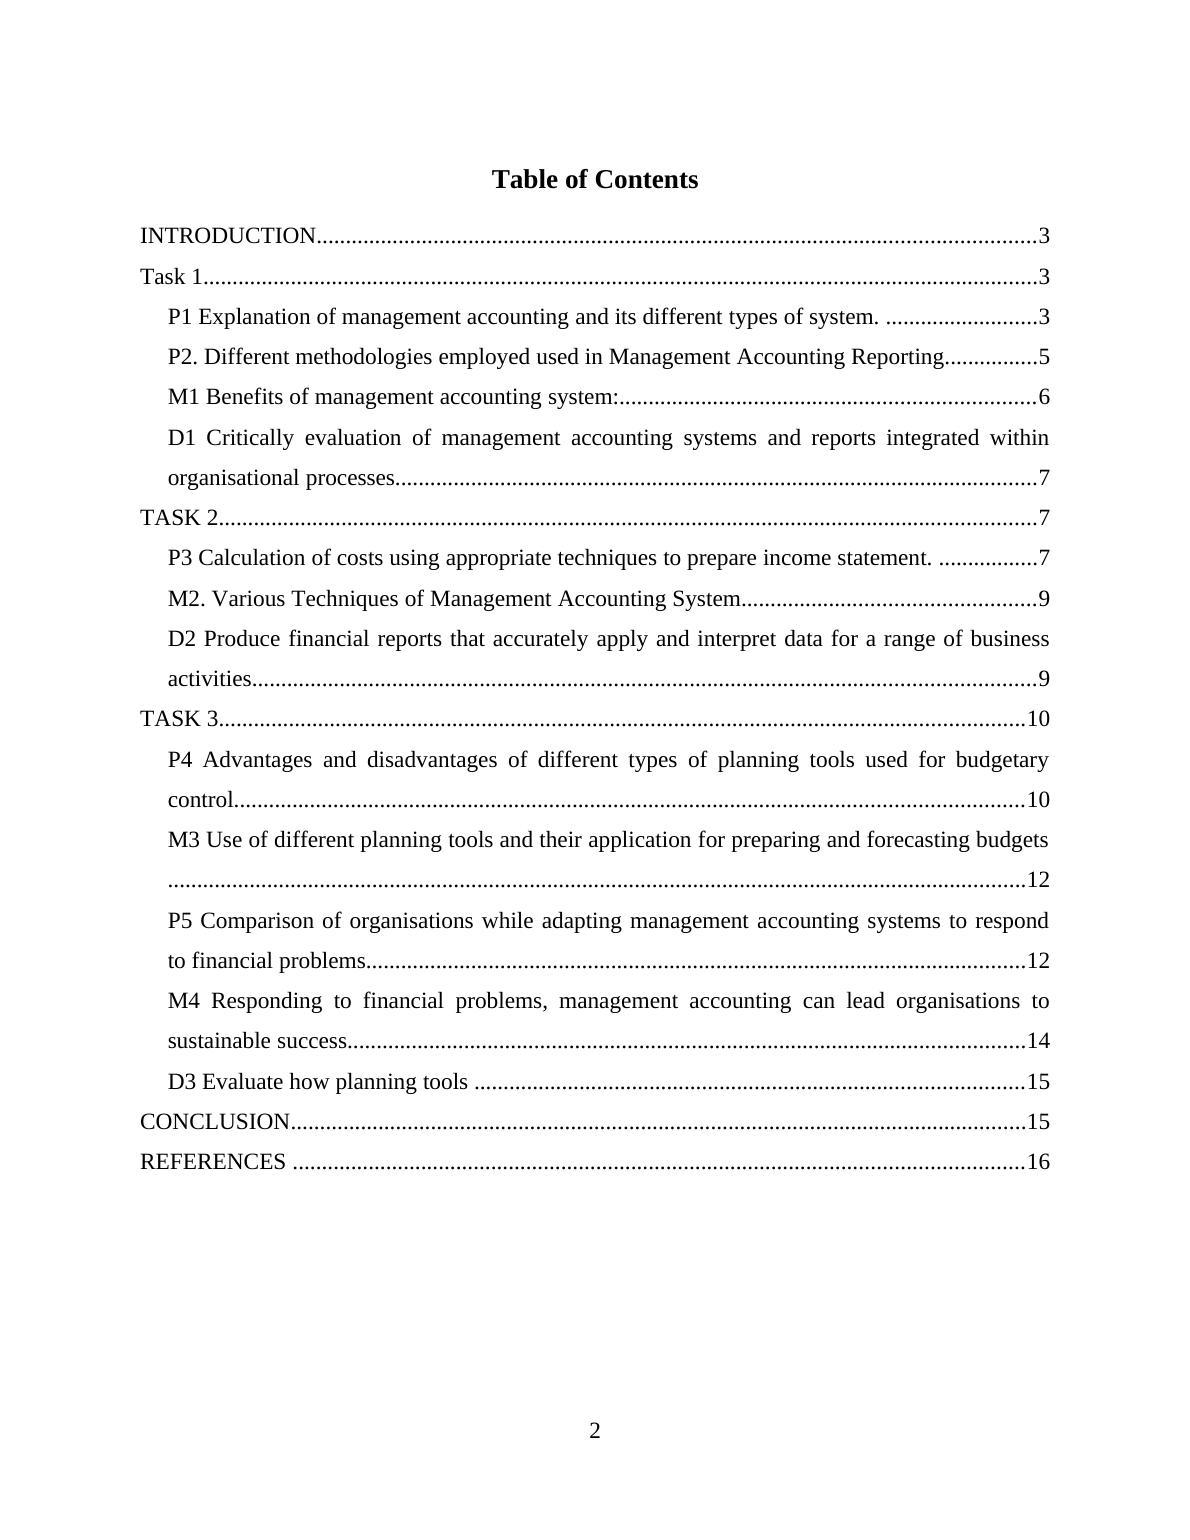 Evaluation of Management Accounting Systems_2